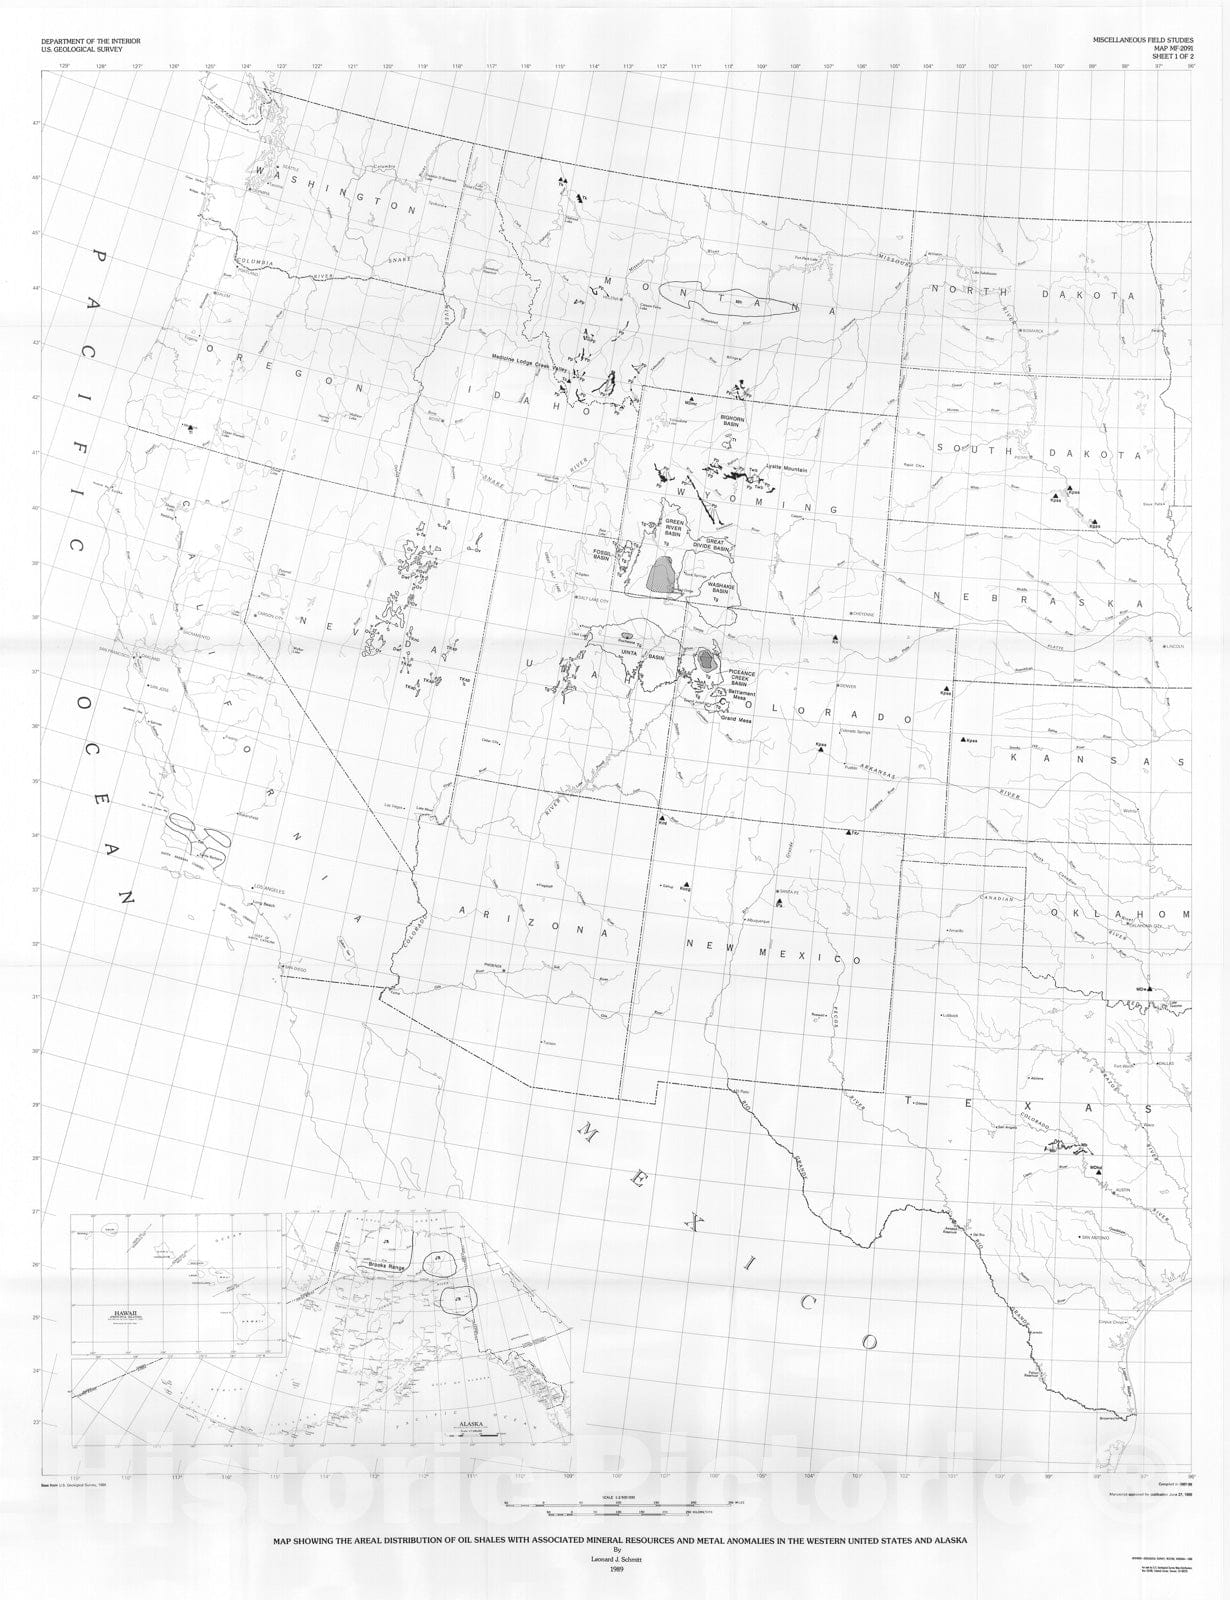 Map : Map showing the areal distribution of oil shales with associated mineral resources and metal anomalies in the western United States and Alaska, 1989 Cartography Wall Art :